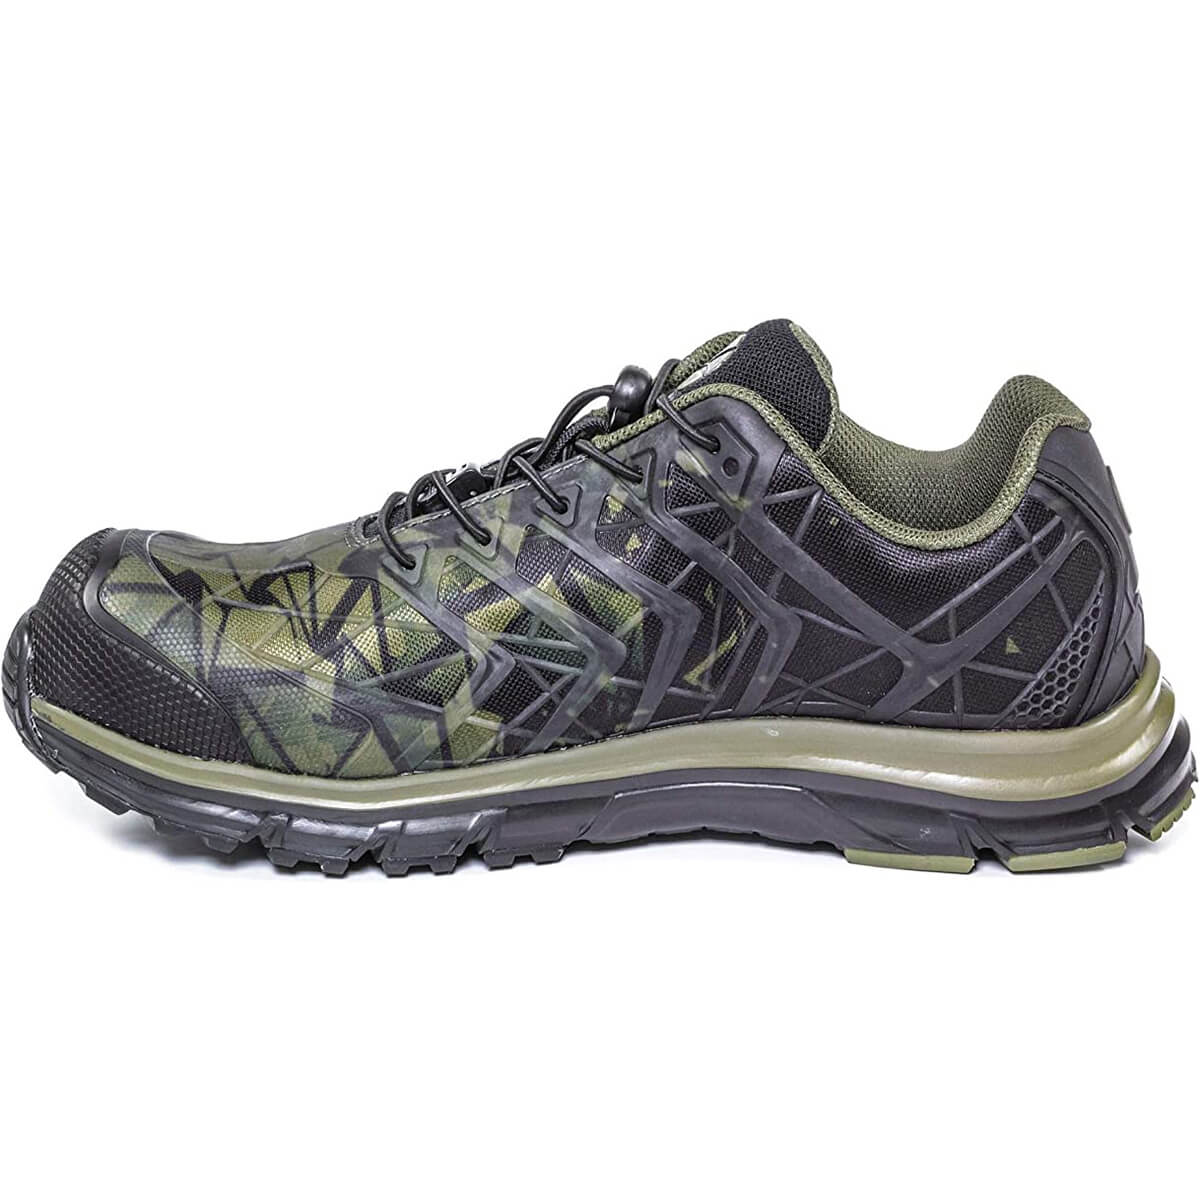 Albatros Energy Impulse Olive Low Safety Trainers - Shoe Store Direct